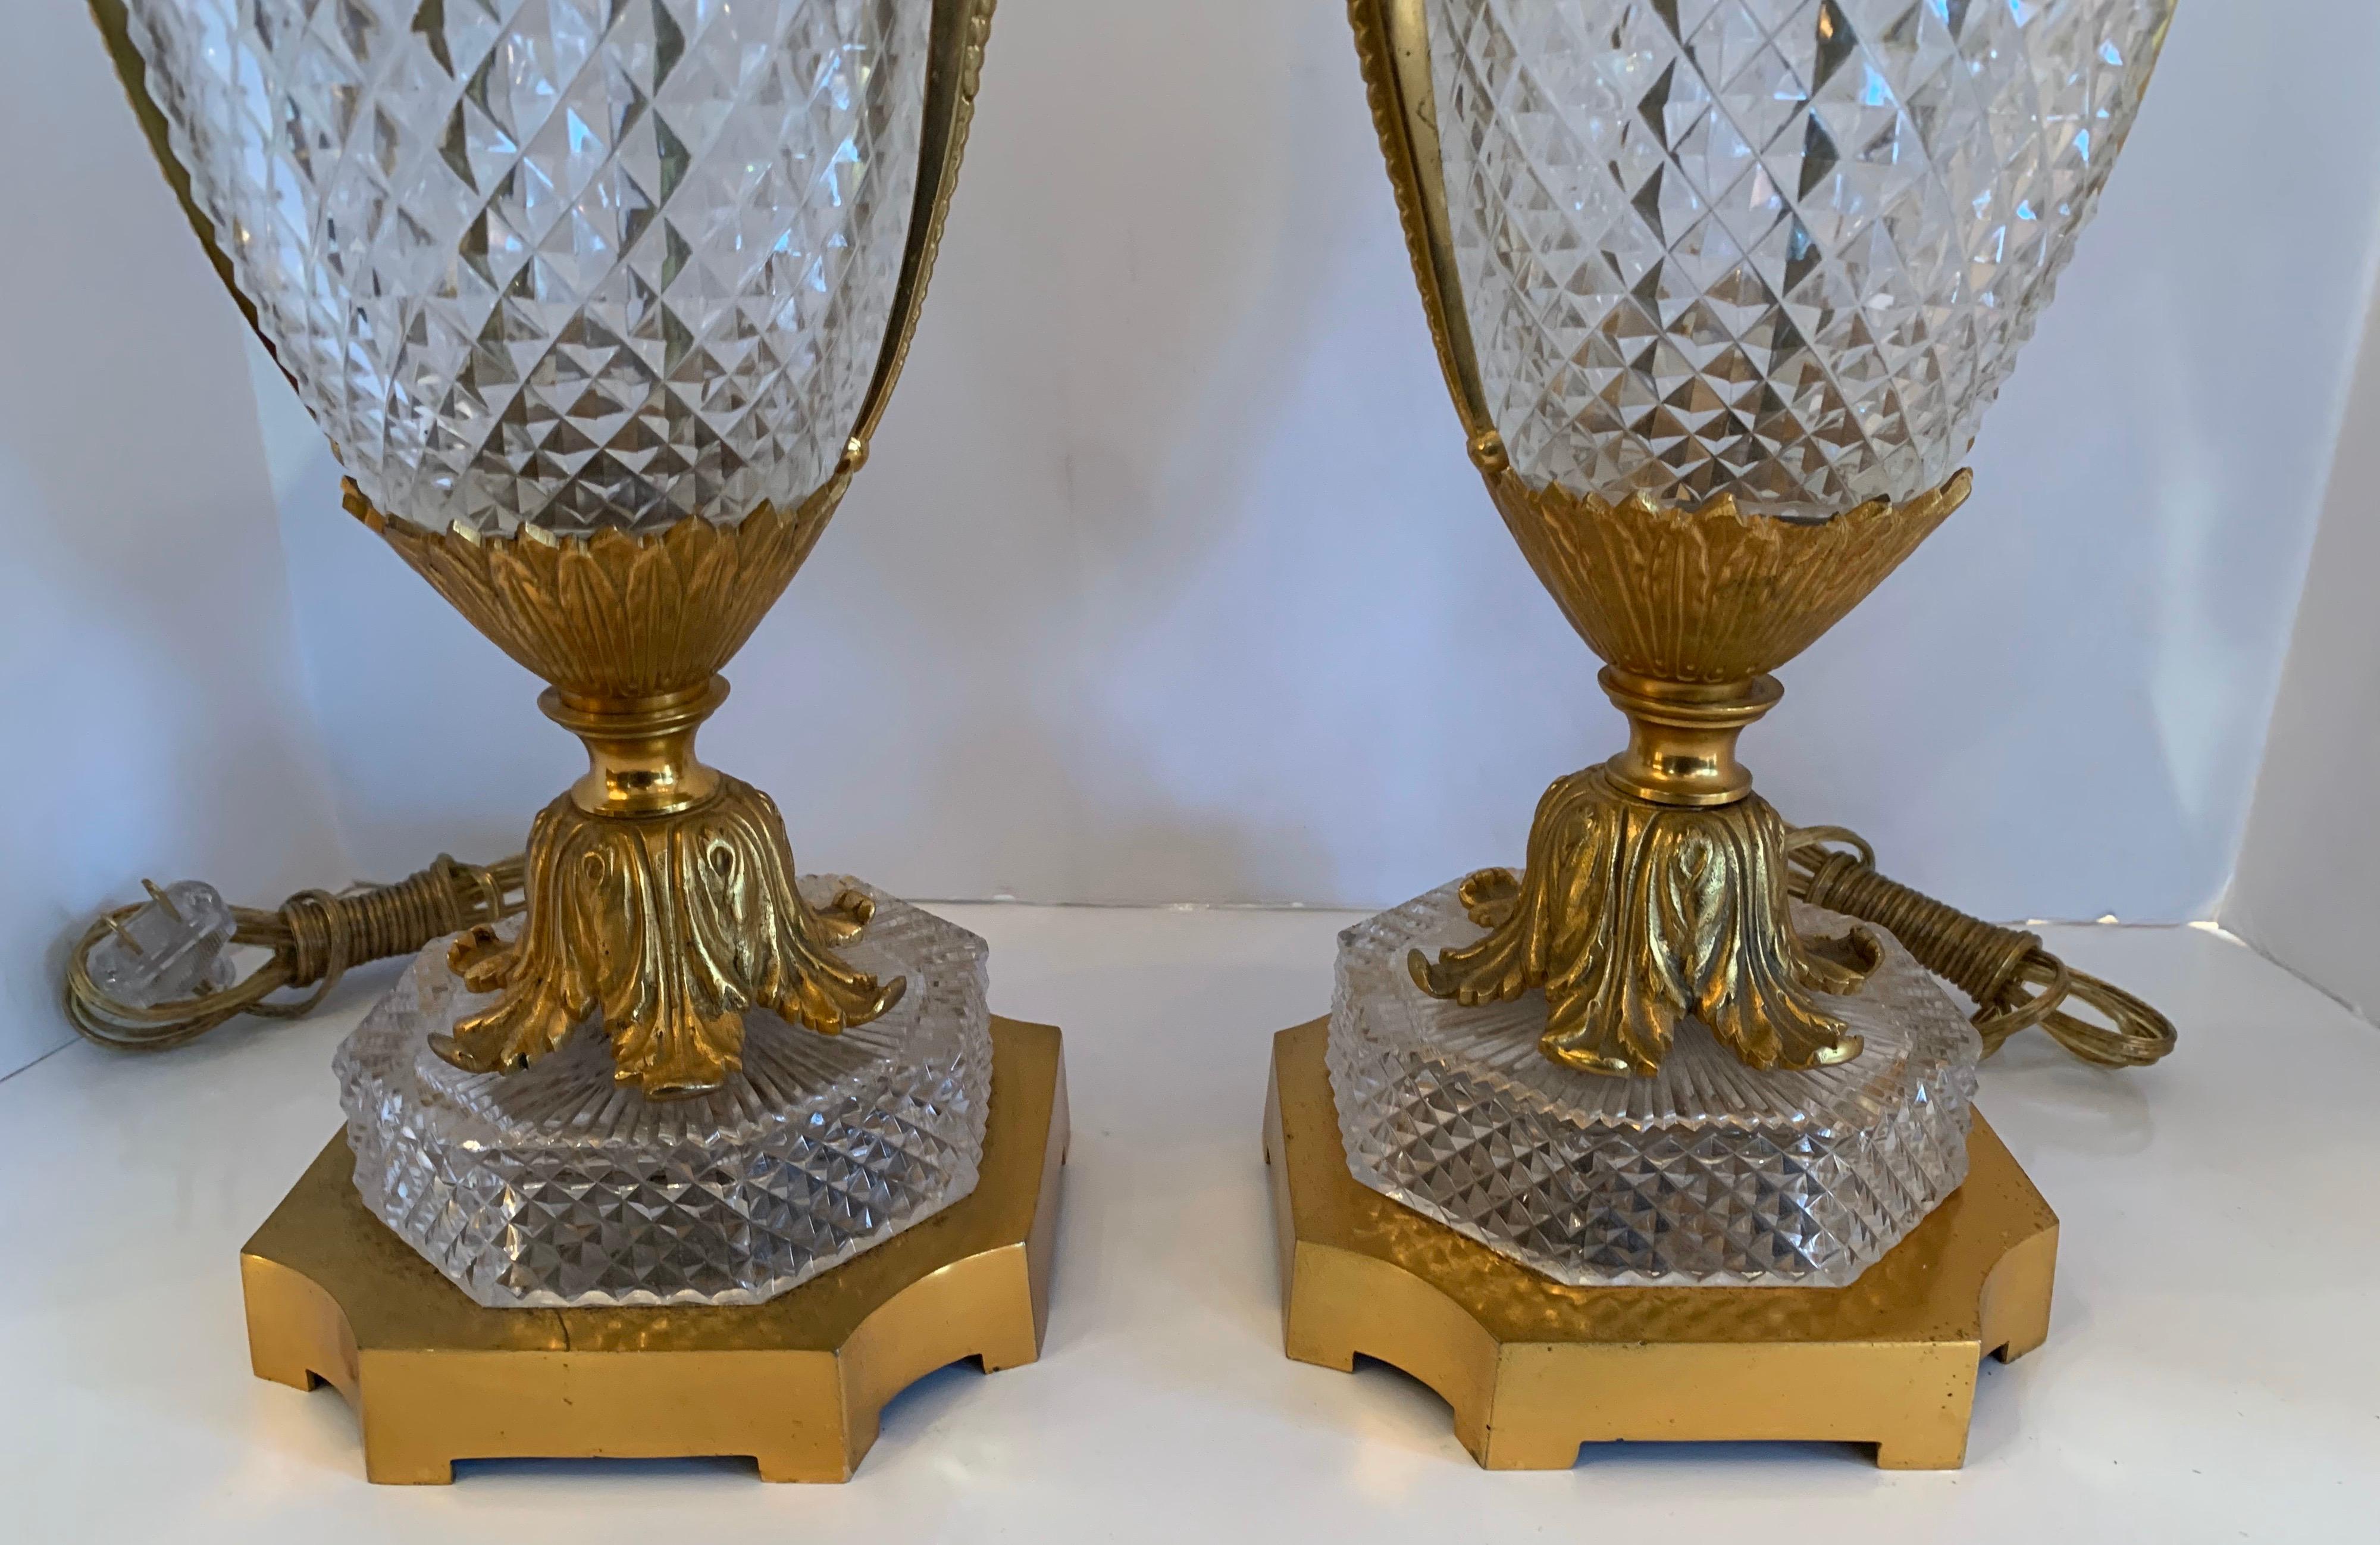 20th Century Wonderful Pair French Gilt Dore Bronze Cut Crystal Baccarat Urn Form Lamps